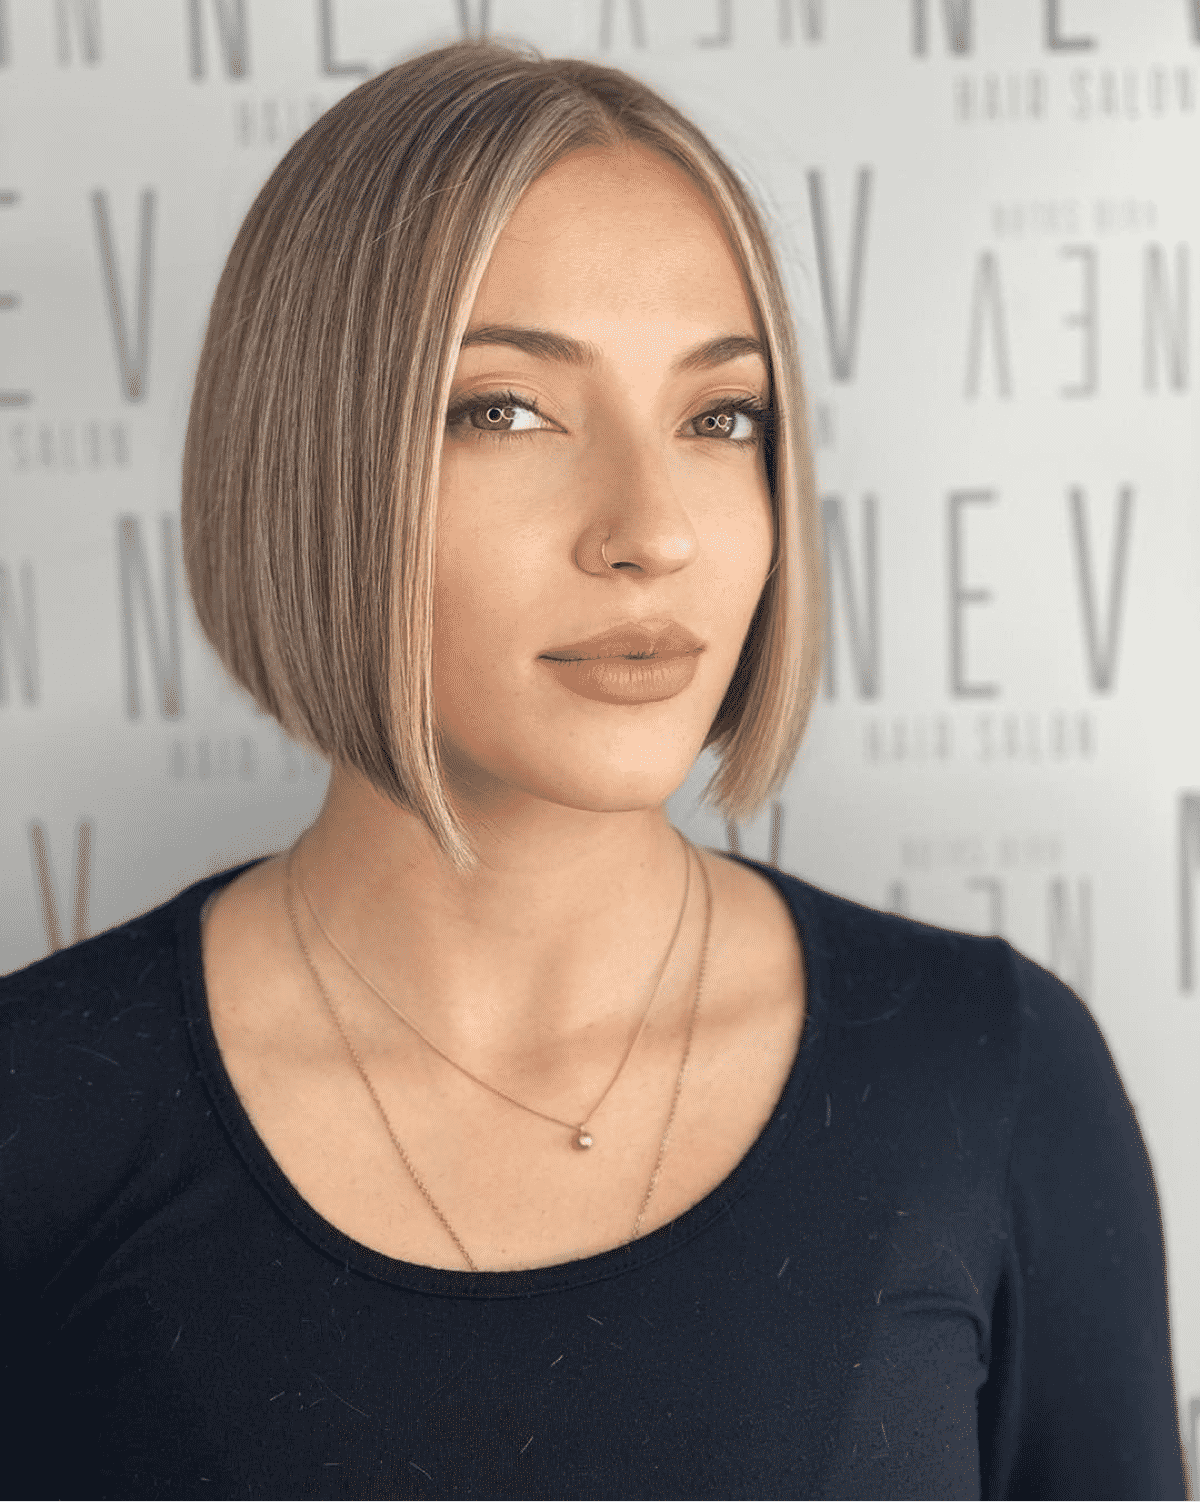 50 Spectacular Blunt Bob Haircut Ideas - The Right Hairstyles